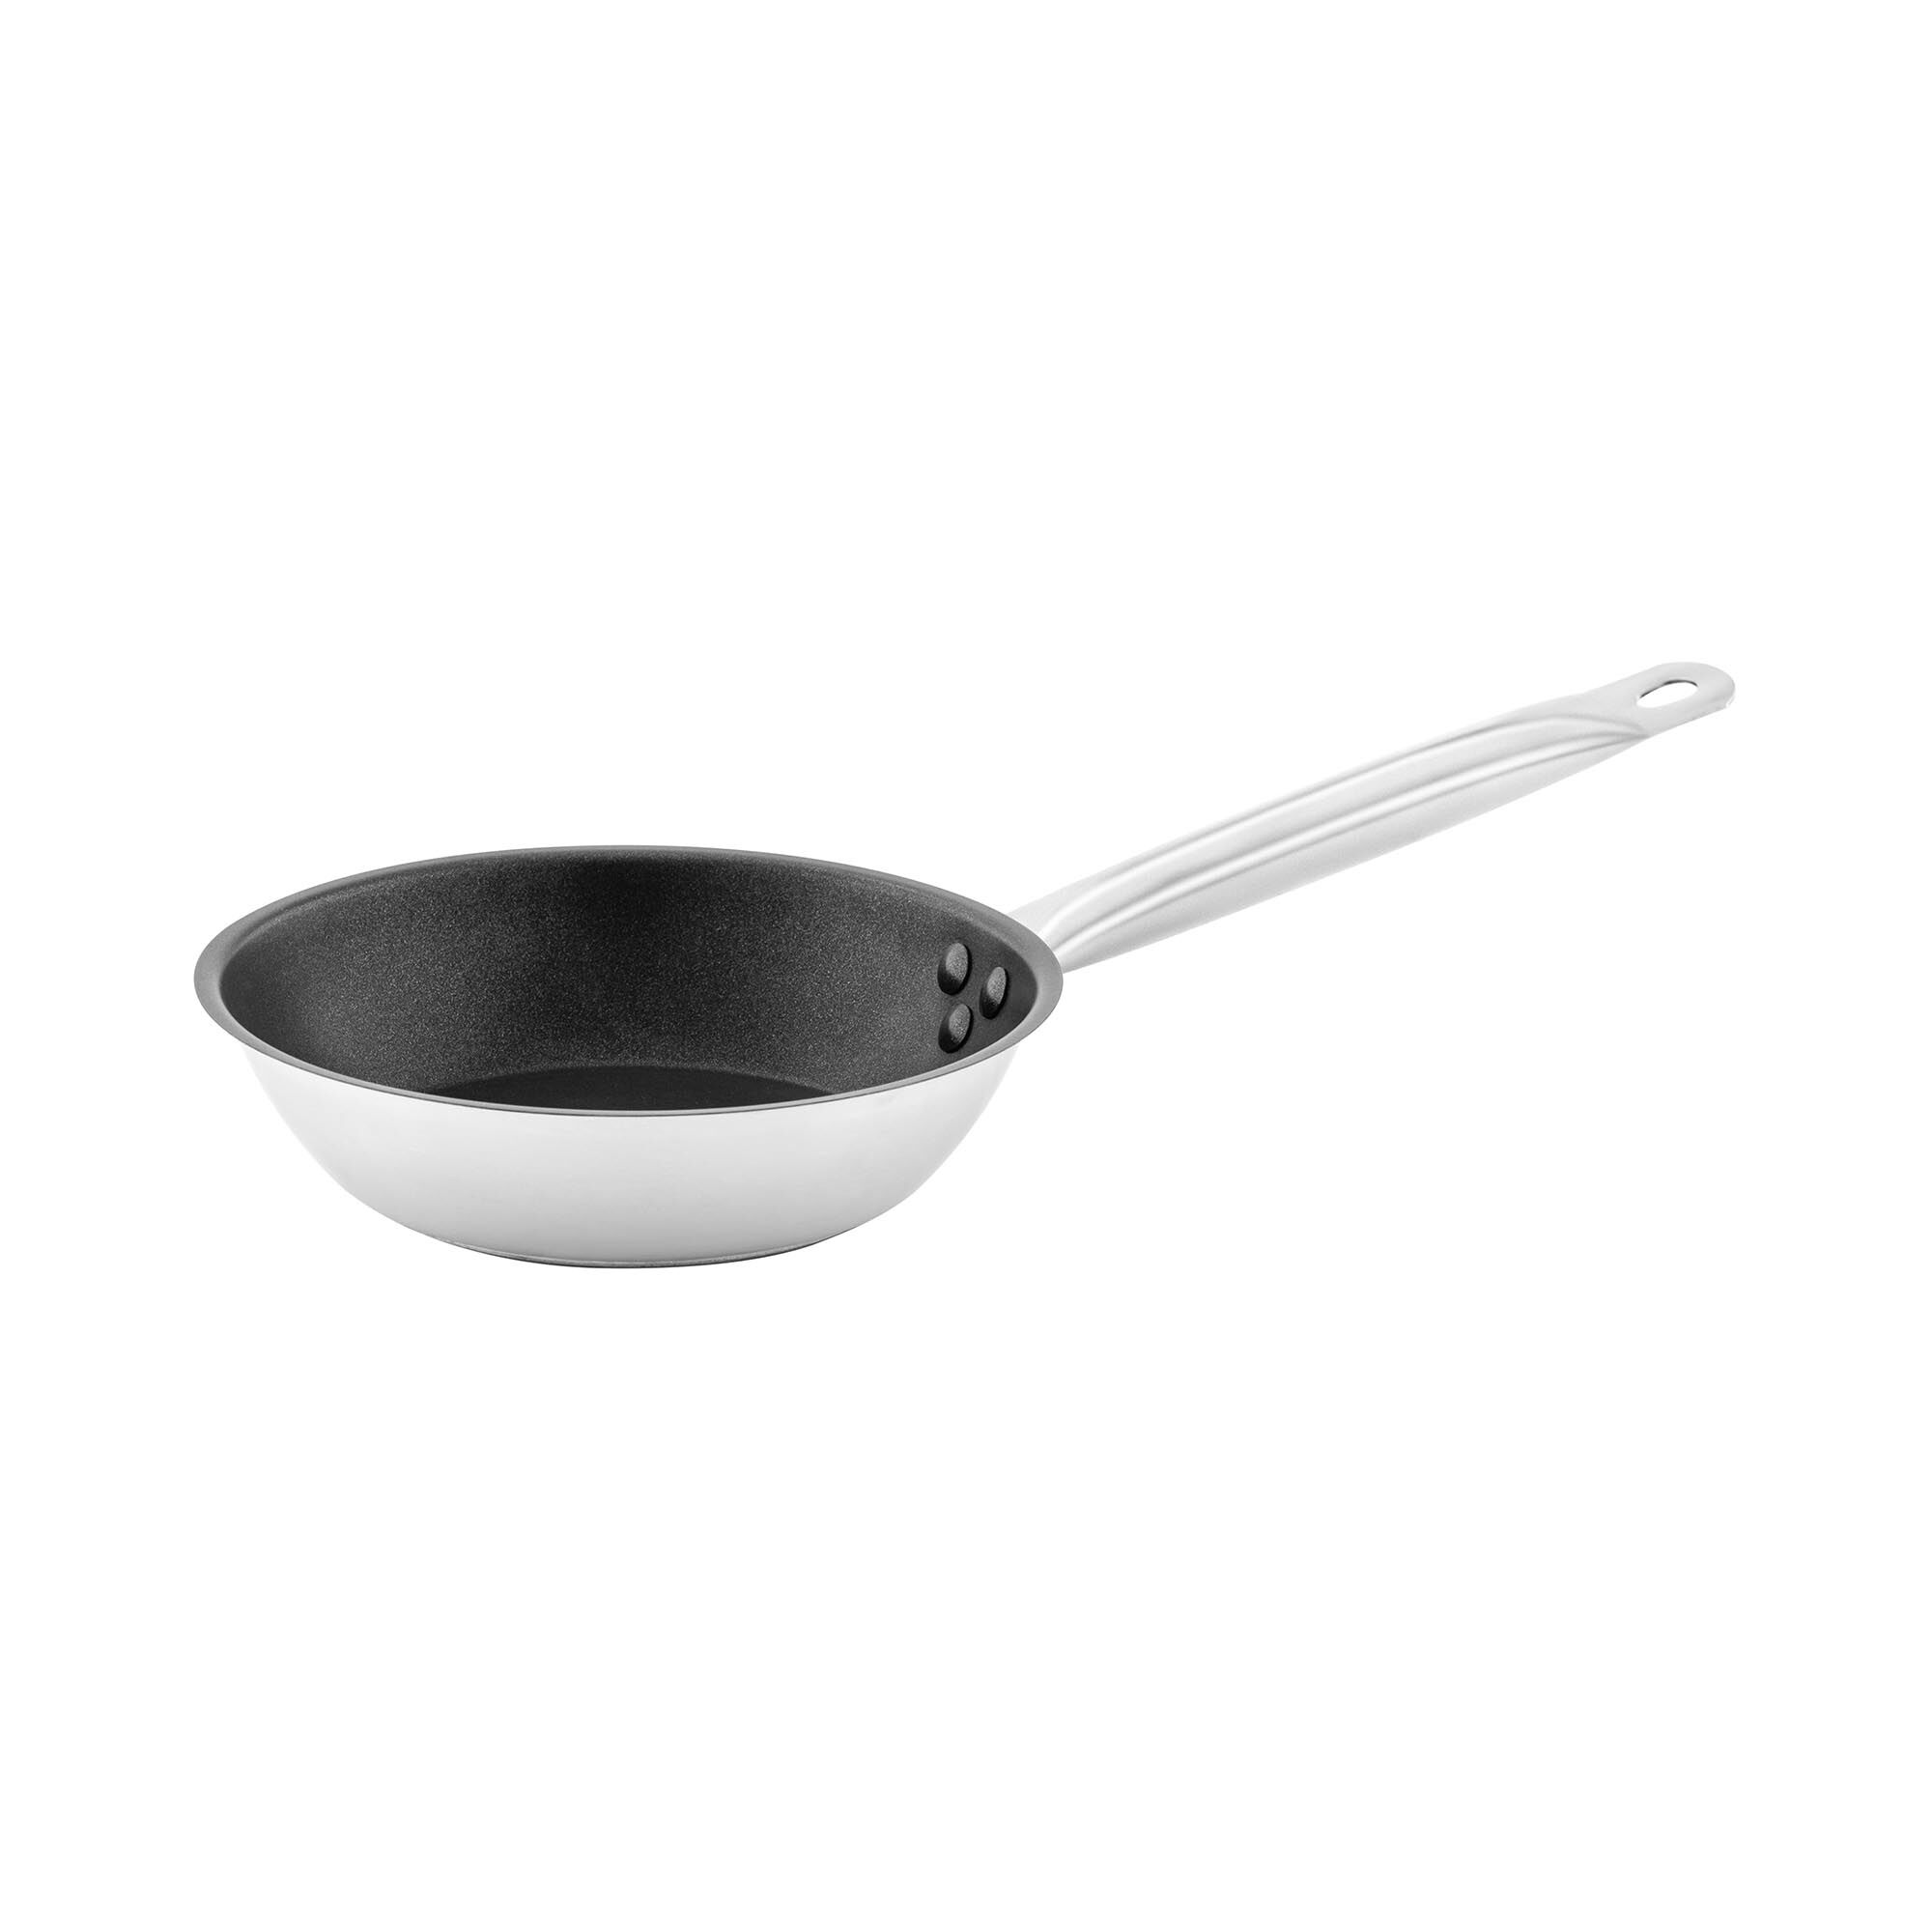 Royal Catering Stainless Steel Frying Pan - coated - Ø 20 x 5 cm